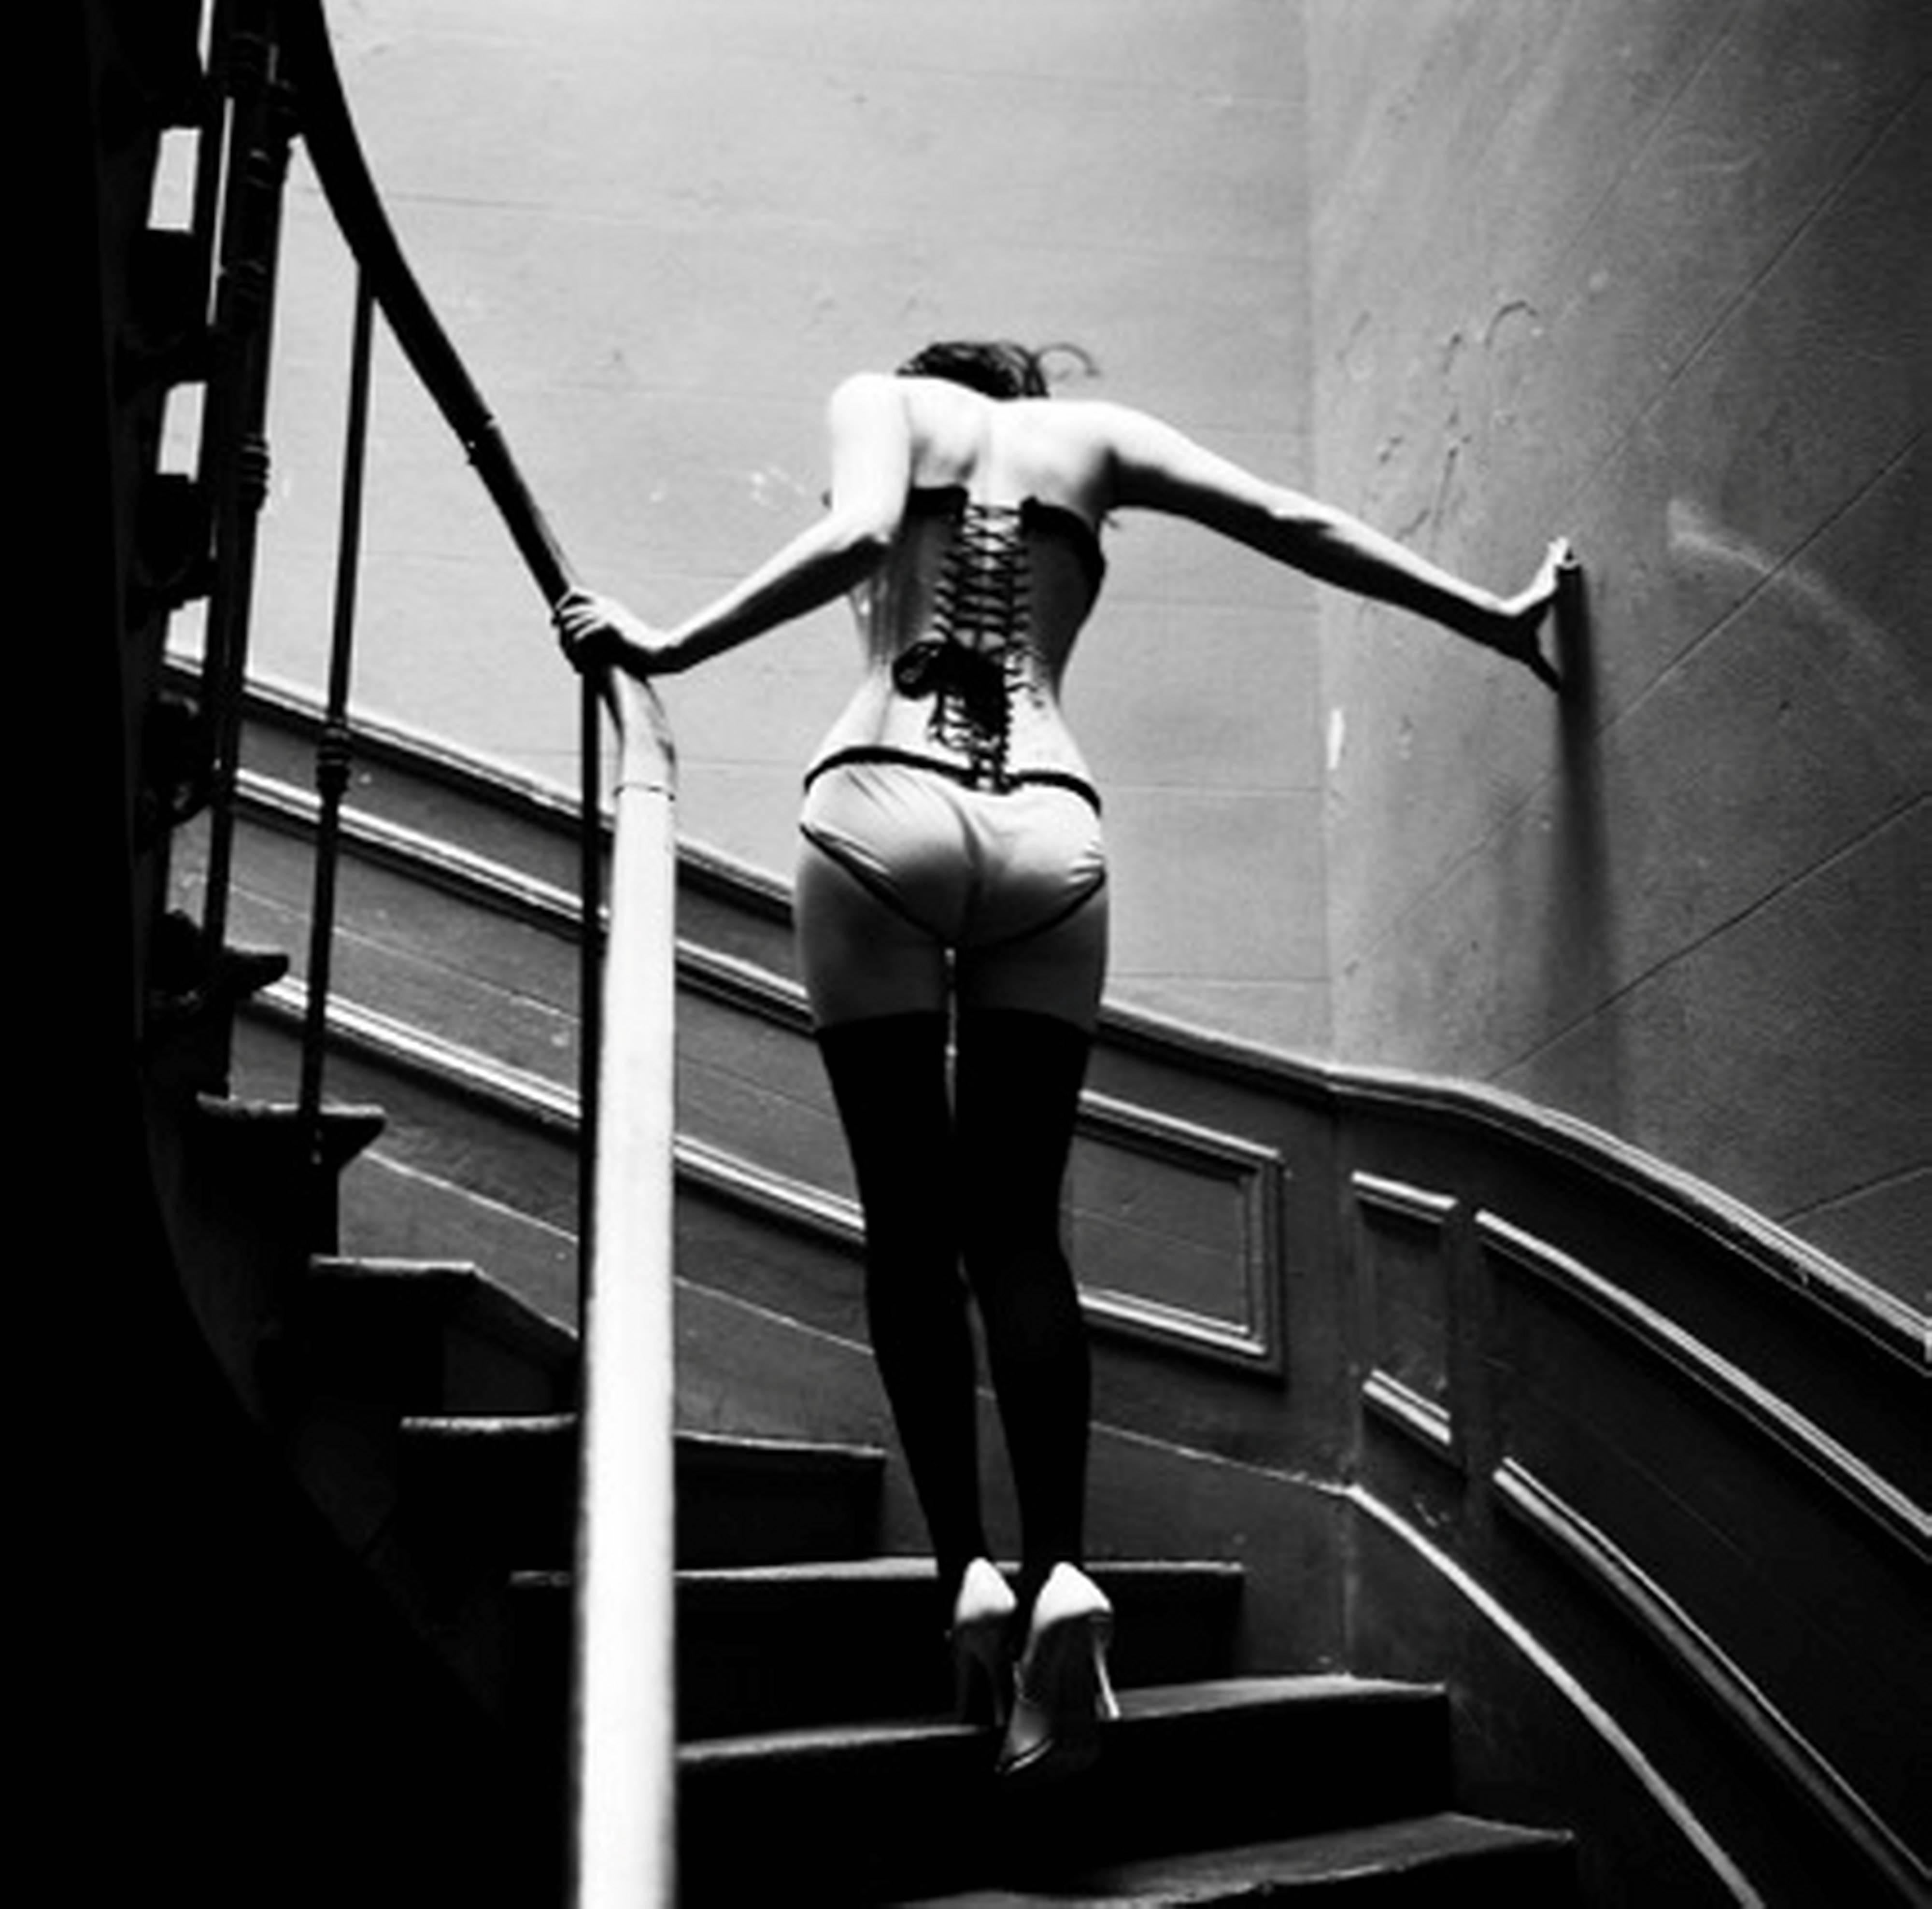 Upstairs, Paris - Model in Lingerie walking up Stairs, fine art photography 1996